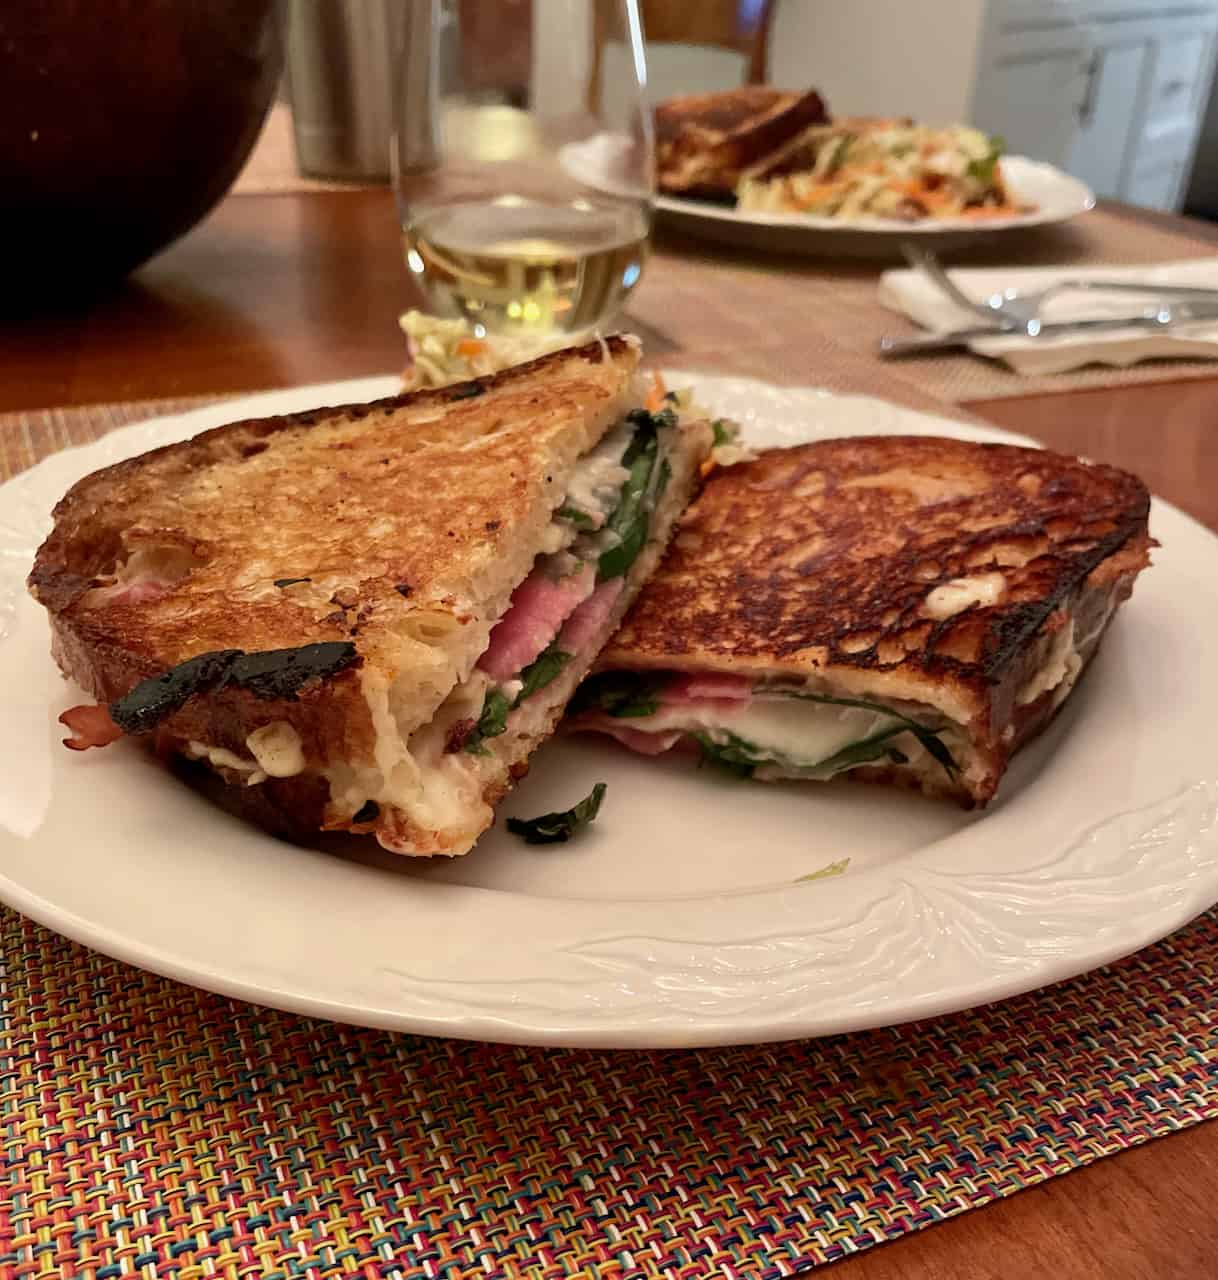 Stanley Tucci’s Favorite Sandwich–Grilled Cheese Plus!